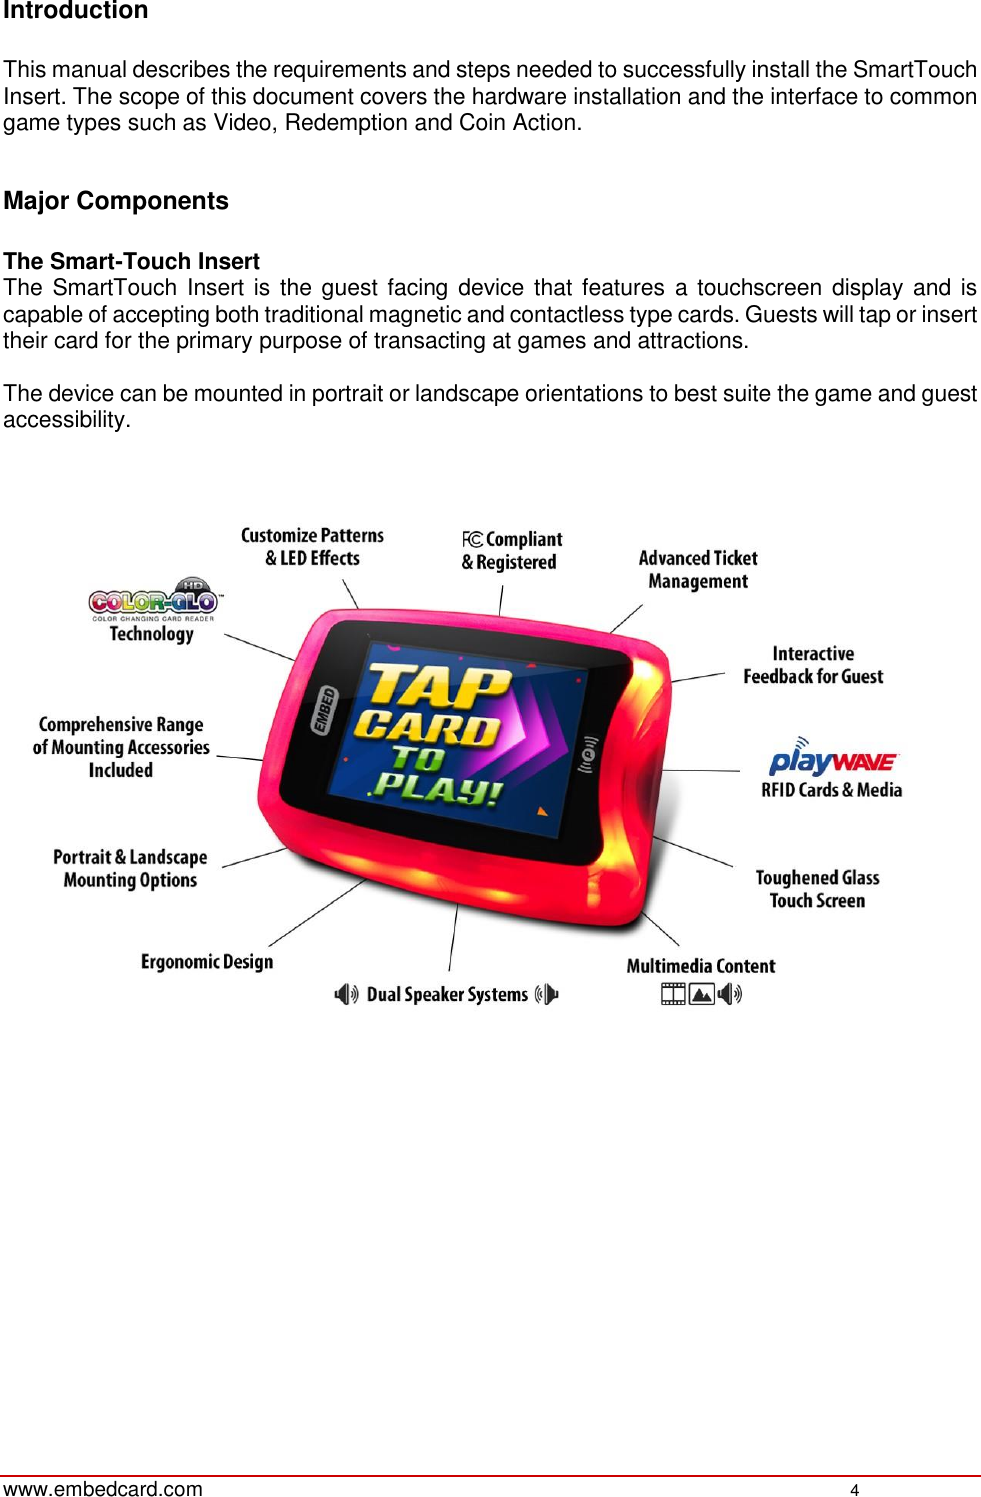   www.embedcard.com    4  Introduction  This manual describes the requirements and steps needed to successfully install the SmartTouch Insert. The scope of this document covers the hardware installation and the interface to common game types such as Video, Redemption and Coin Action.   Major Components  The Smart-Touch Insert  The SmartTouch Insert is the guest facing device  that features a touchscreen display and is capable of accepting both traditional magnetic and contactless type cards. Guests will tap or insert their card for the primary purpose of transacting at games and attractions.  The device can be mounted in portrait or landscape orientations to best suite the game and guest accessibility.       